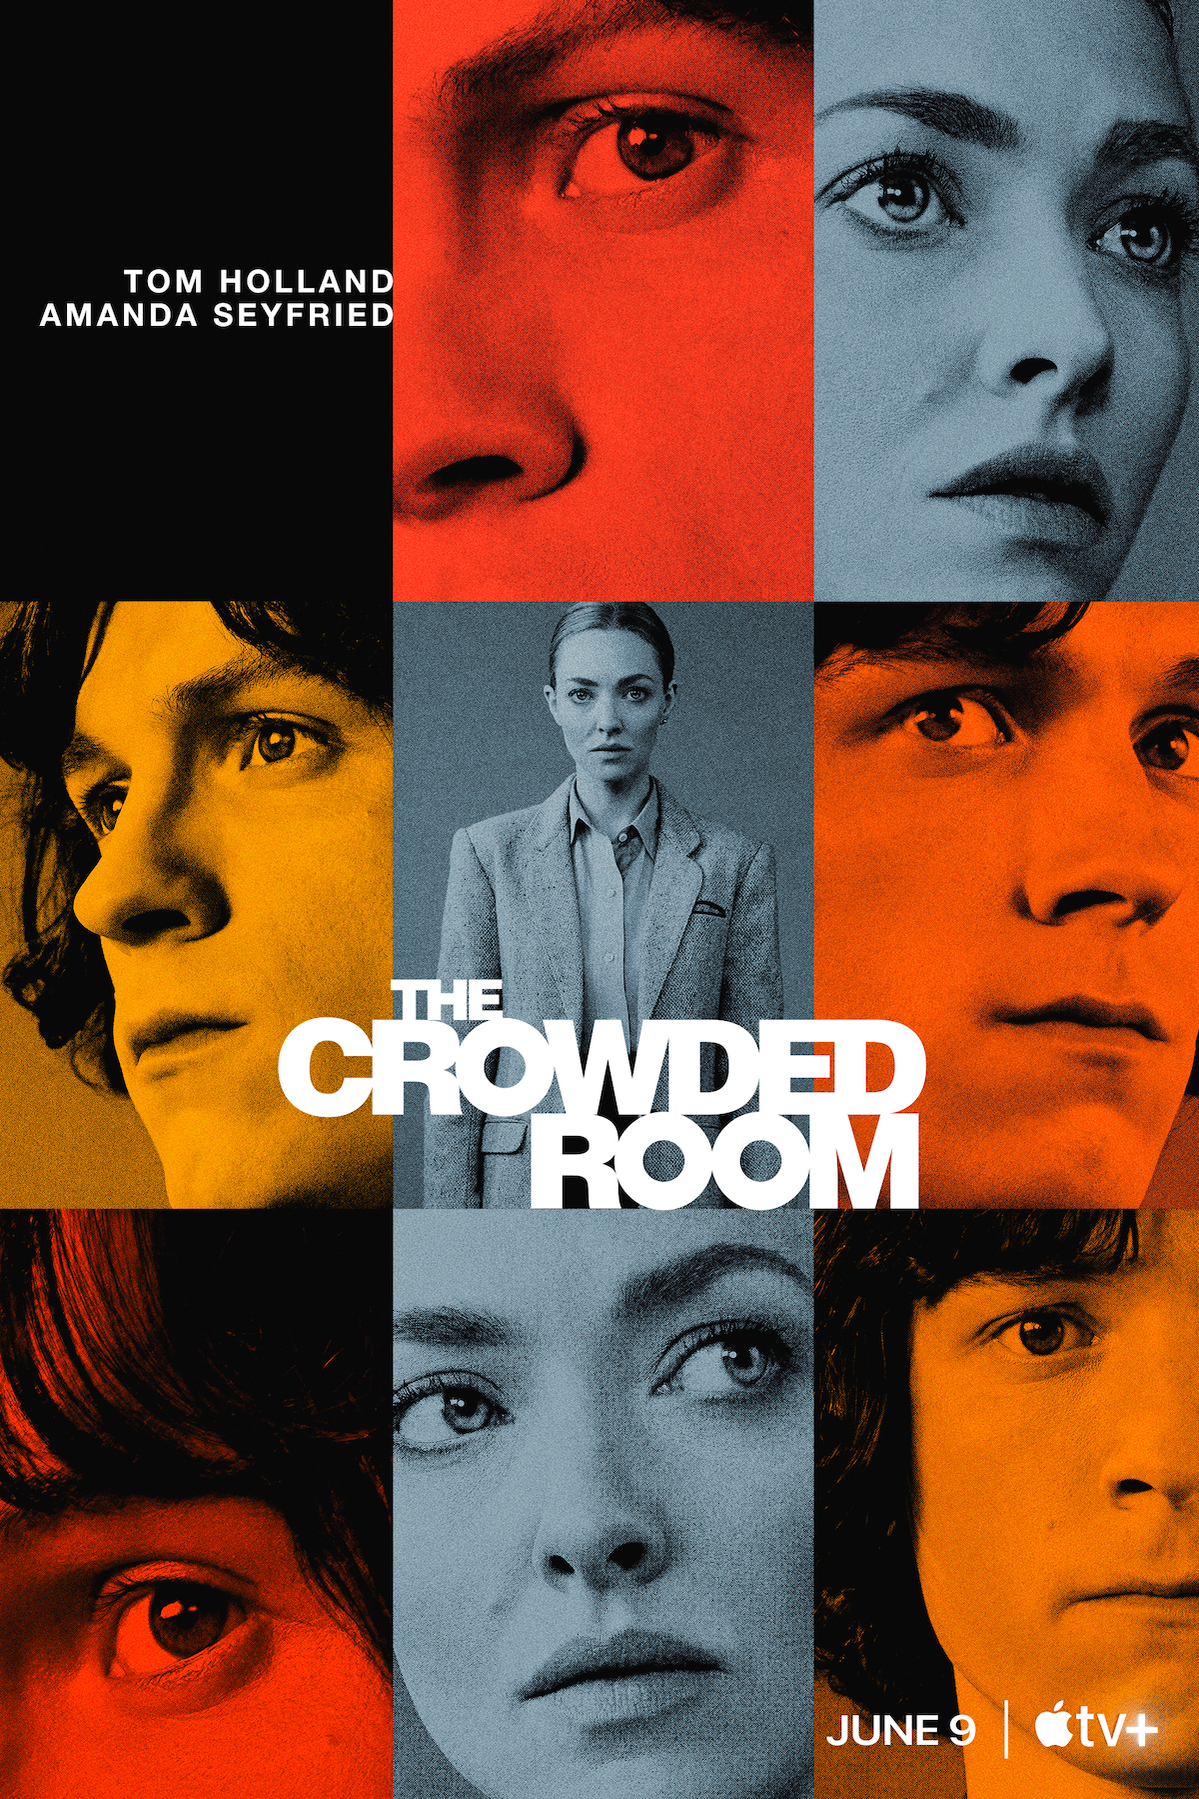 apple-tv-the-crowded-room-key-art-2-3.png